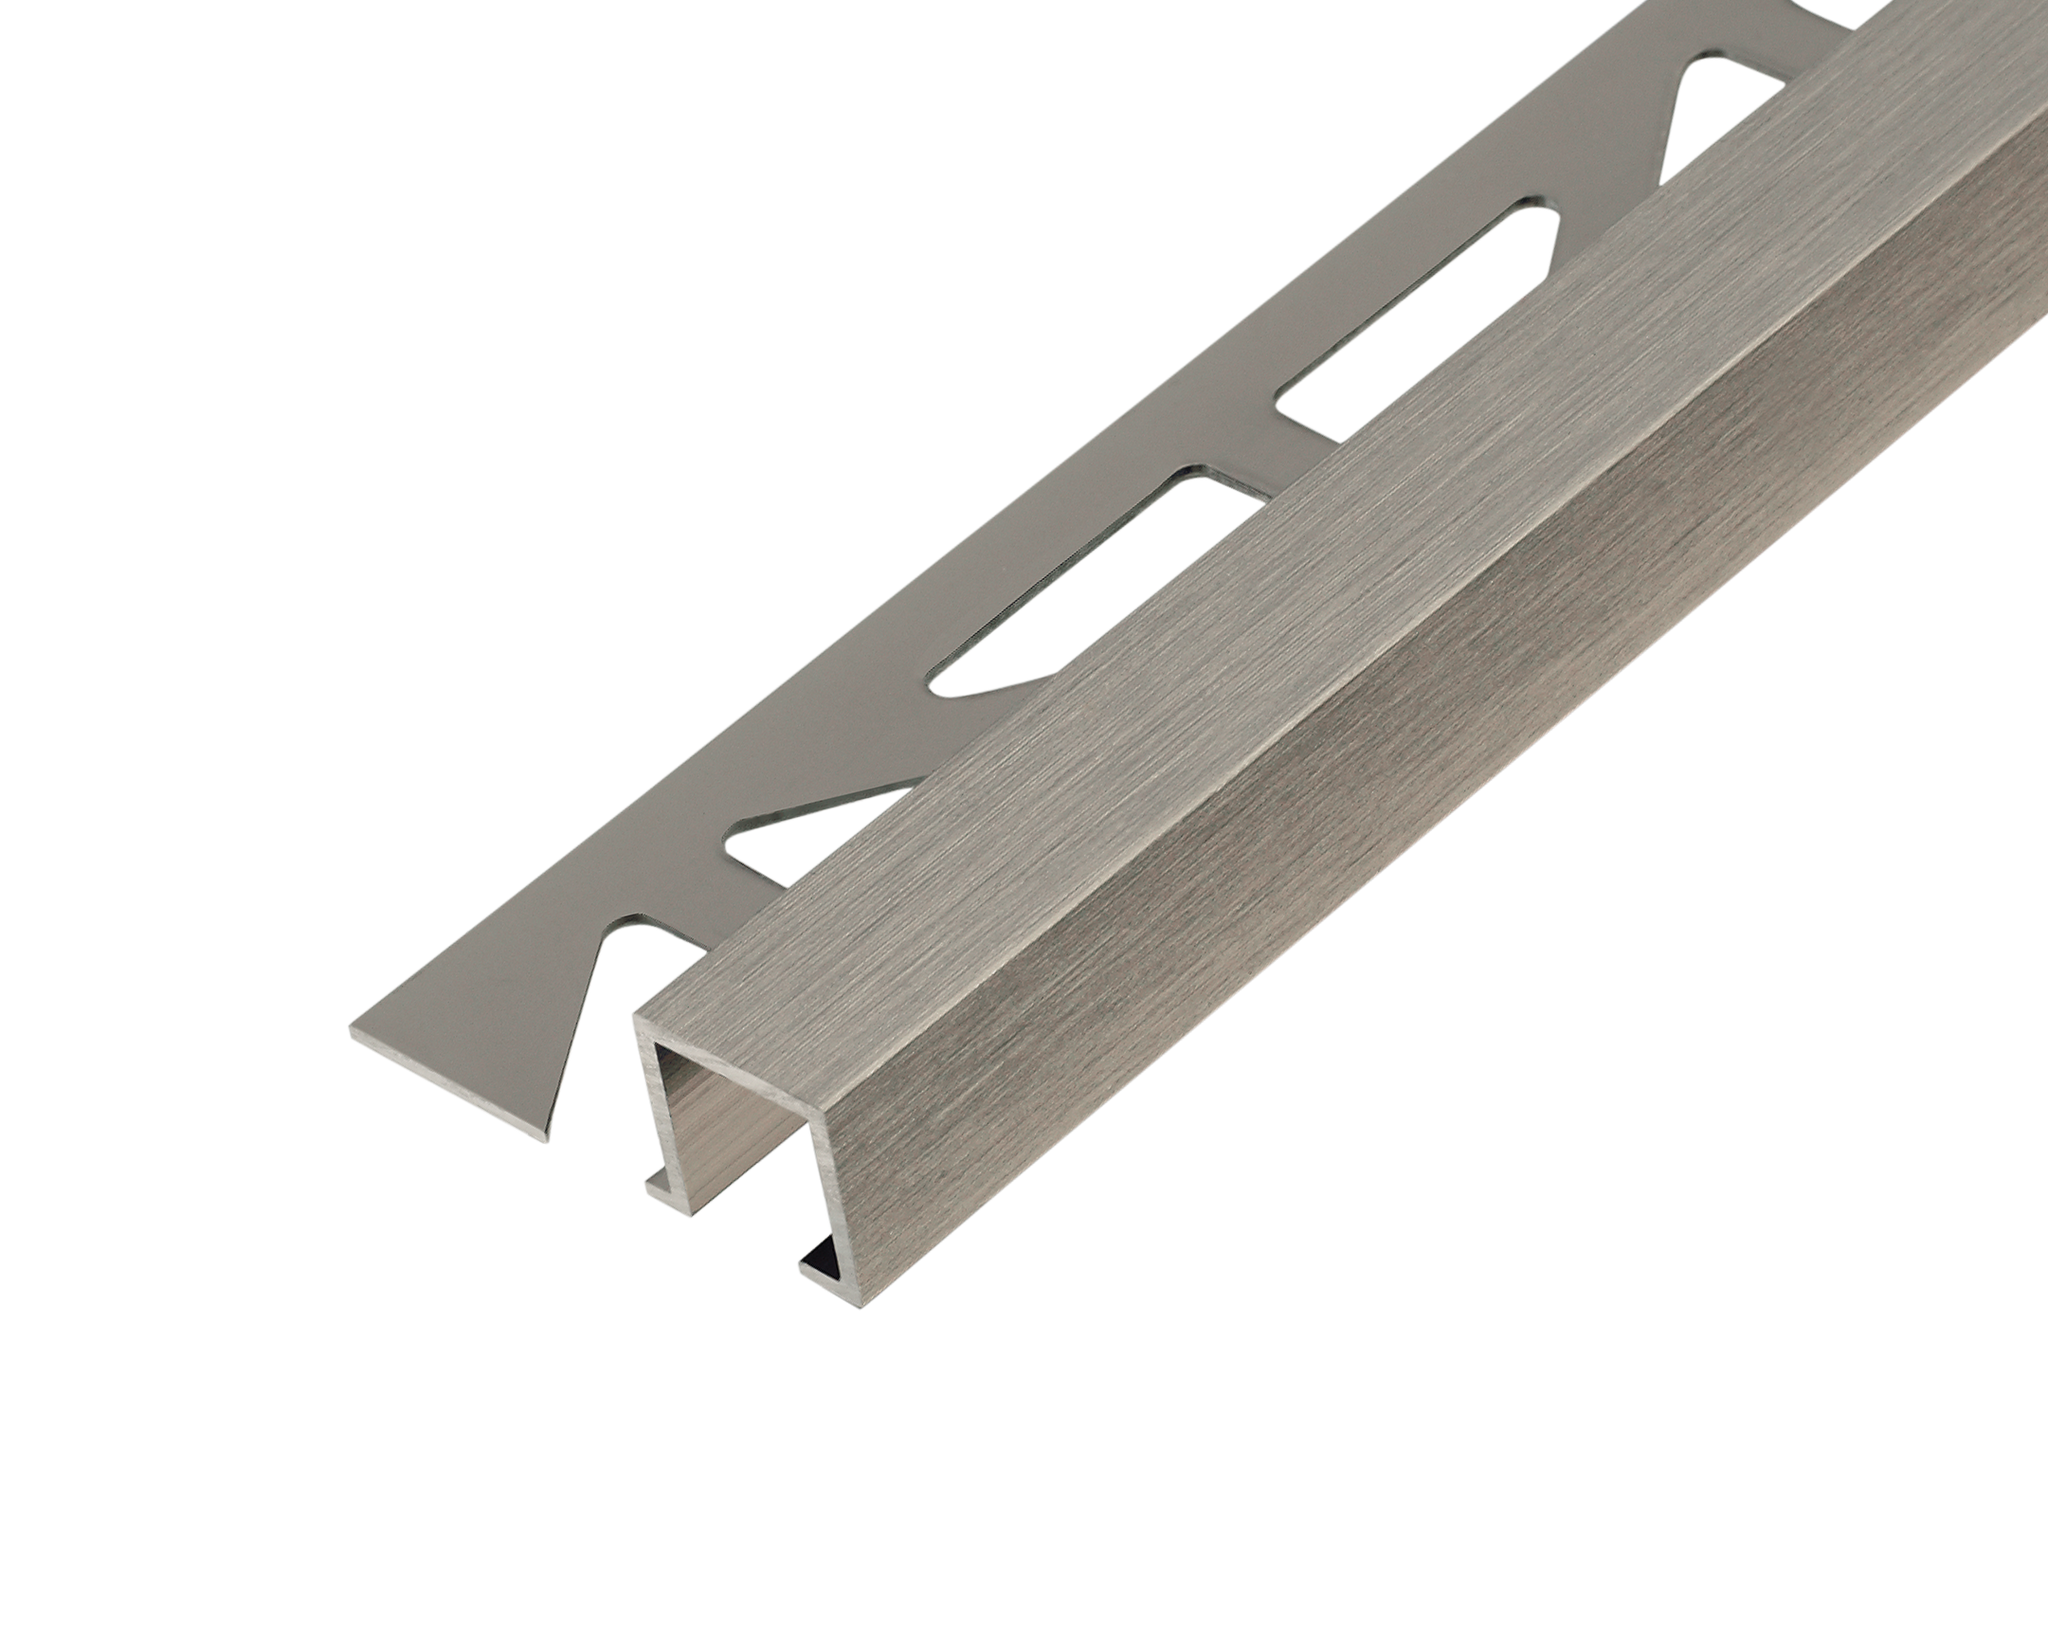 Dural Squareline Profile 7/16 in. Square Edge - Nickel - High Gloss Anodized Brushed - Tile edge Trim